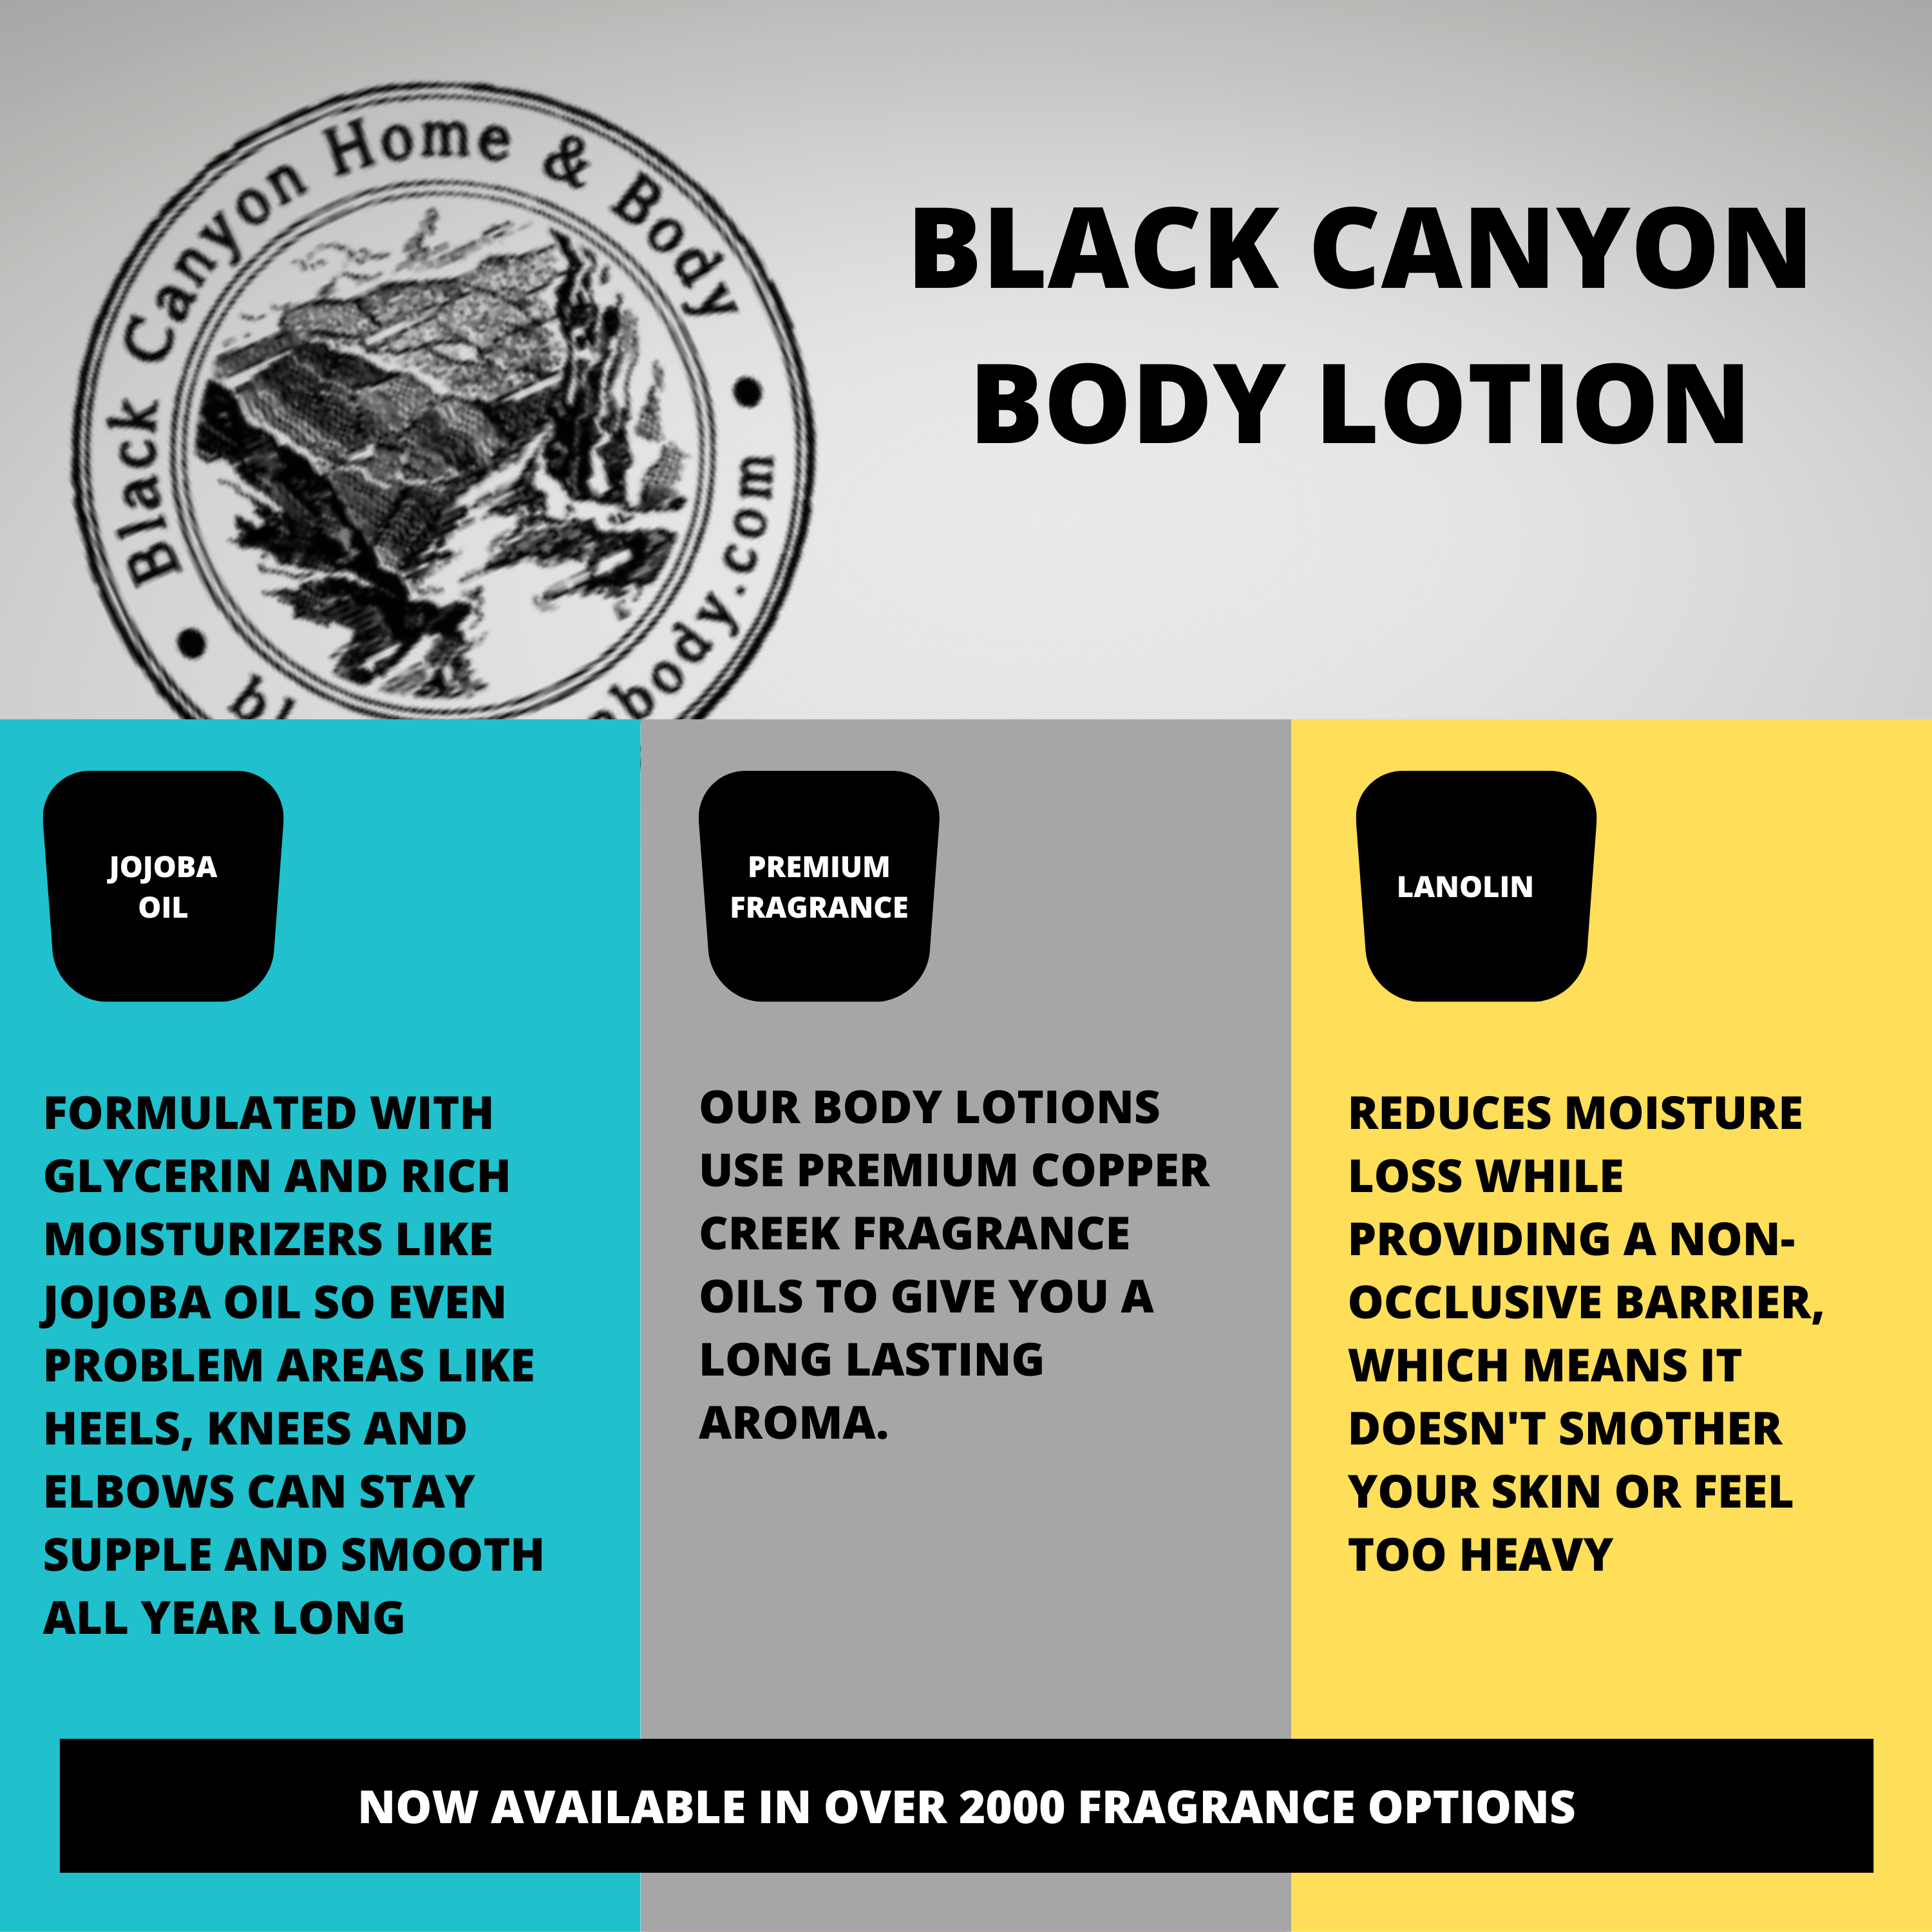 Black Canyon Apple Blossom & Vanilla Scented Luxury Body Lotion with Lanolin and Jojoba Oil